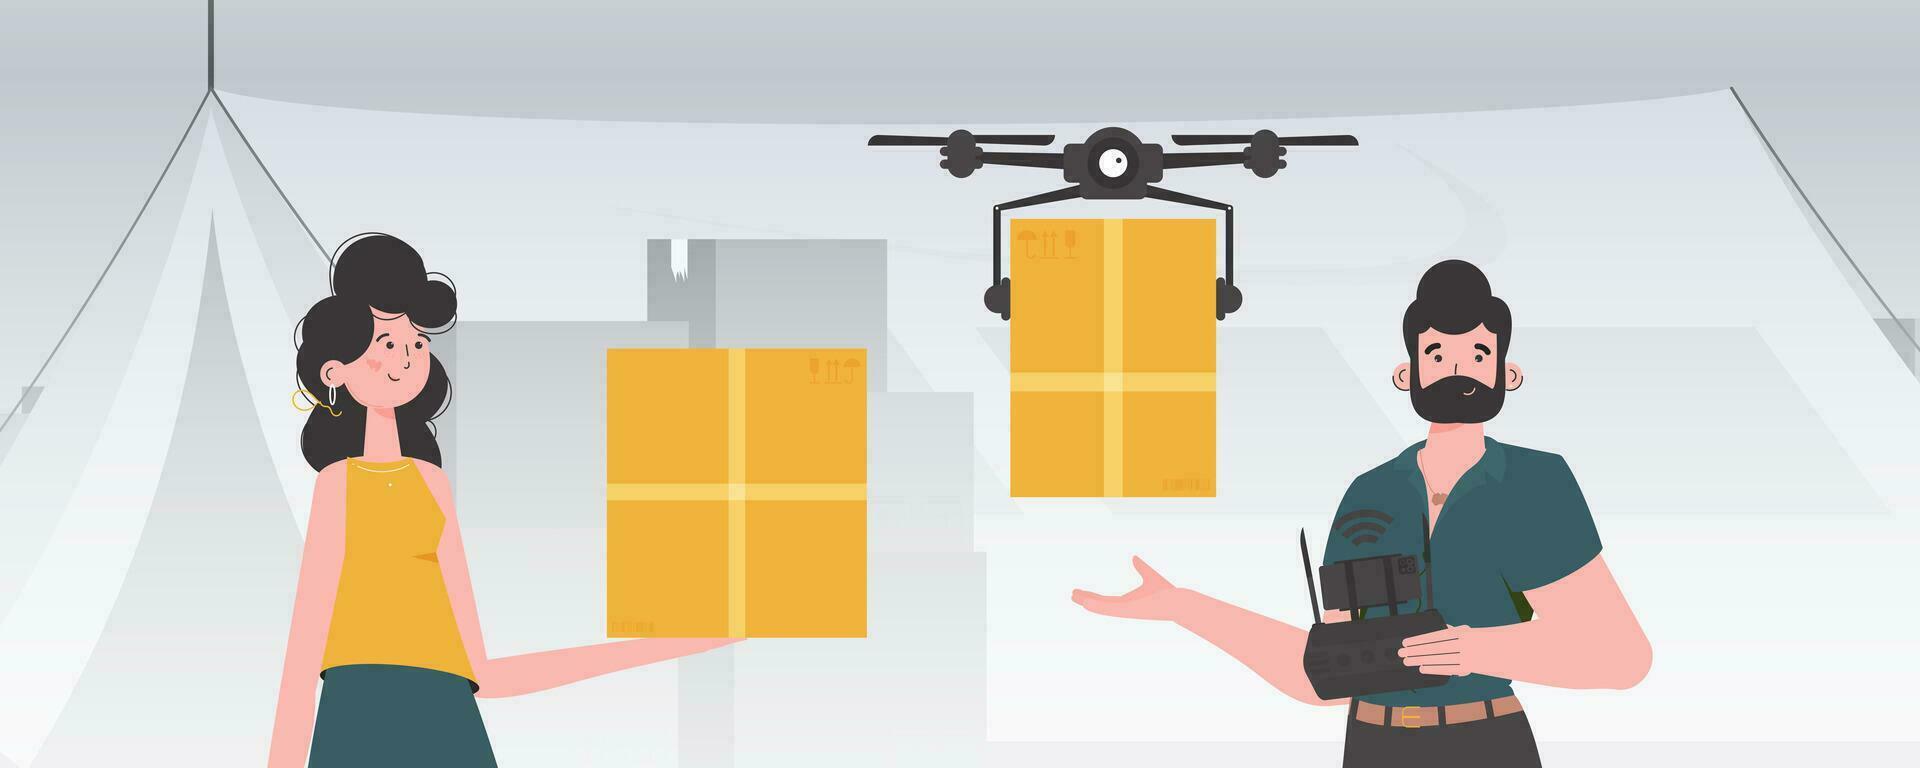 Camp for humanitarian aid. The quadcopter is transporting the parcel. Man and woman with cardboard boxes. trendy style. Vector illustration.